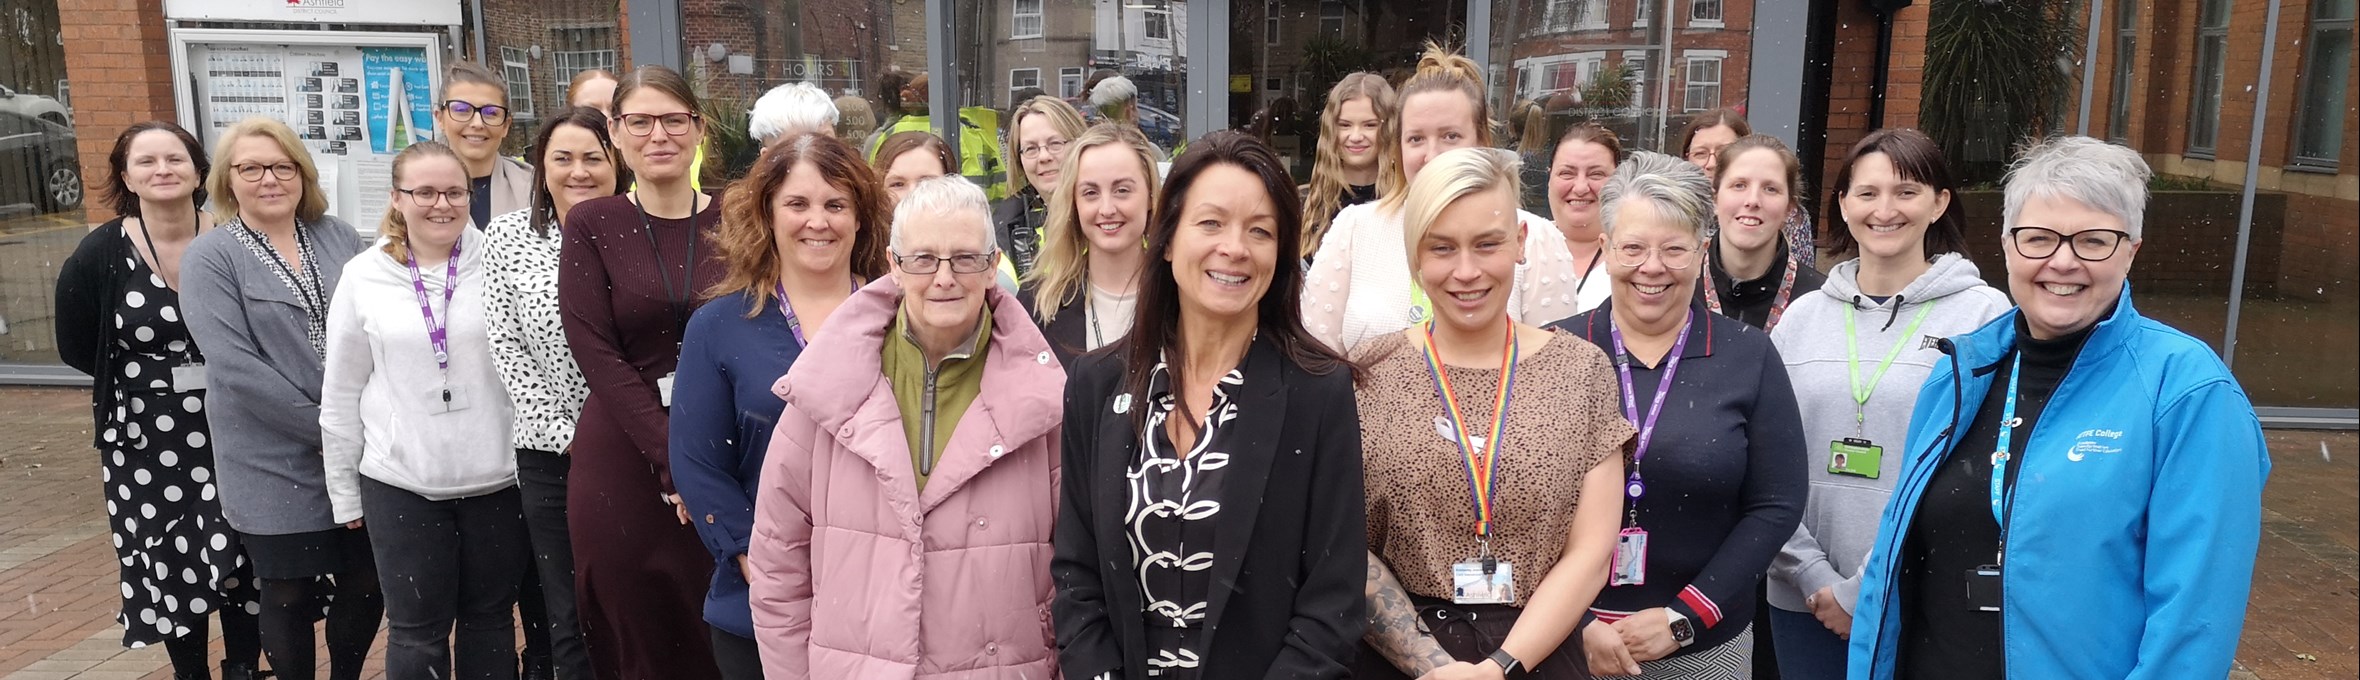 CEO Theresa Hodgkinson, Cllr Rachael Madden and employees of Ashfield District Council